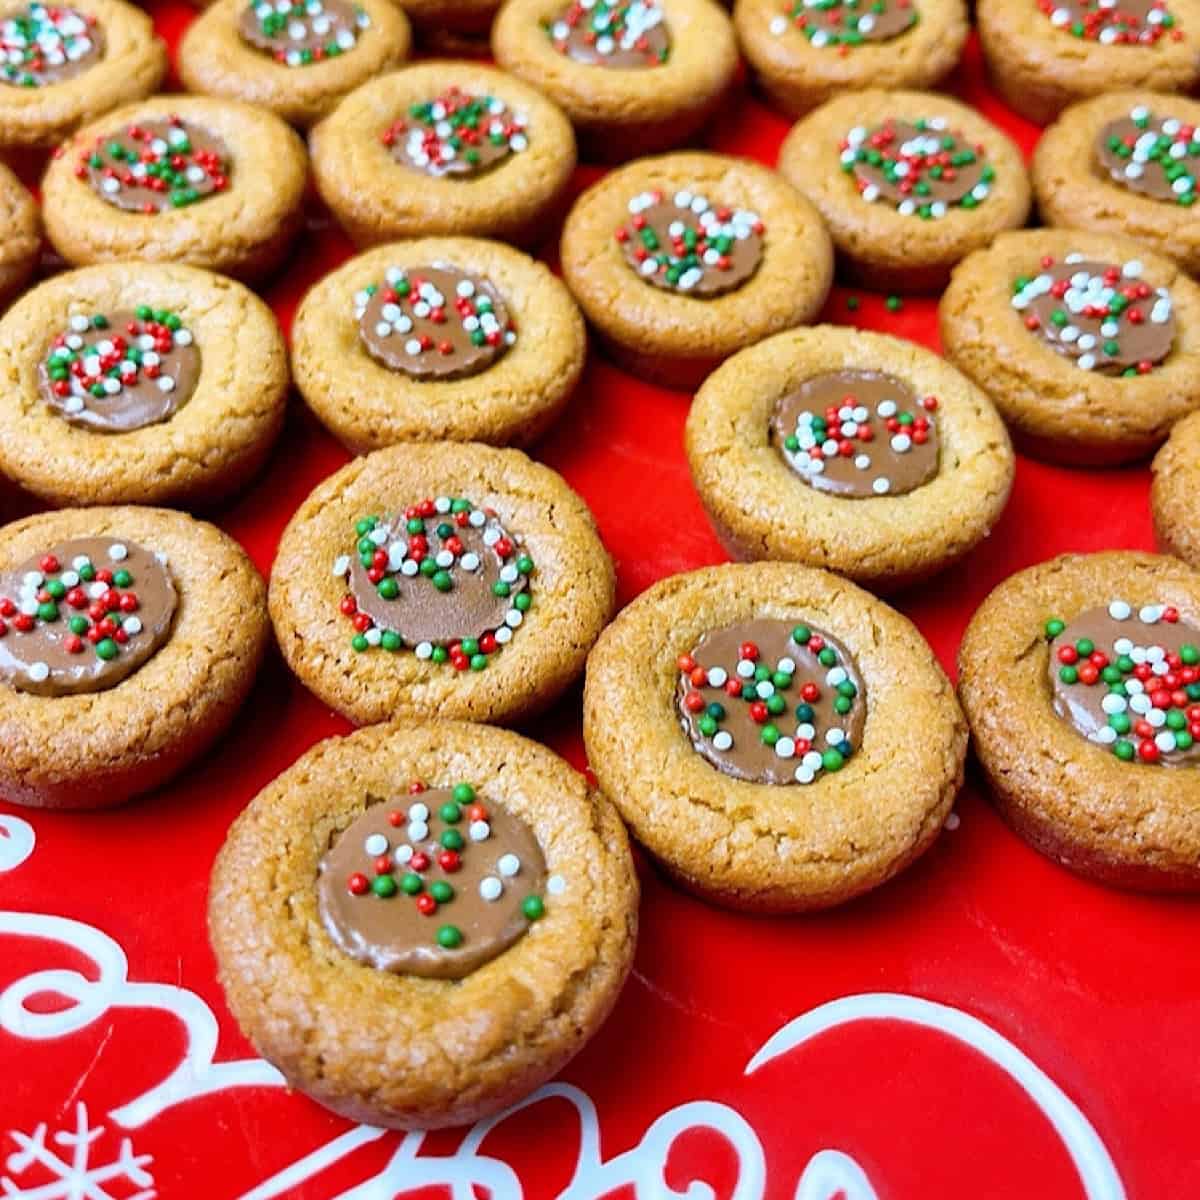 Peanut Butter Cup Cookies with sprinkles on a red Christmas plate